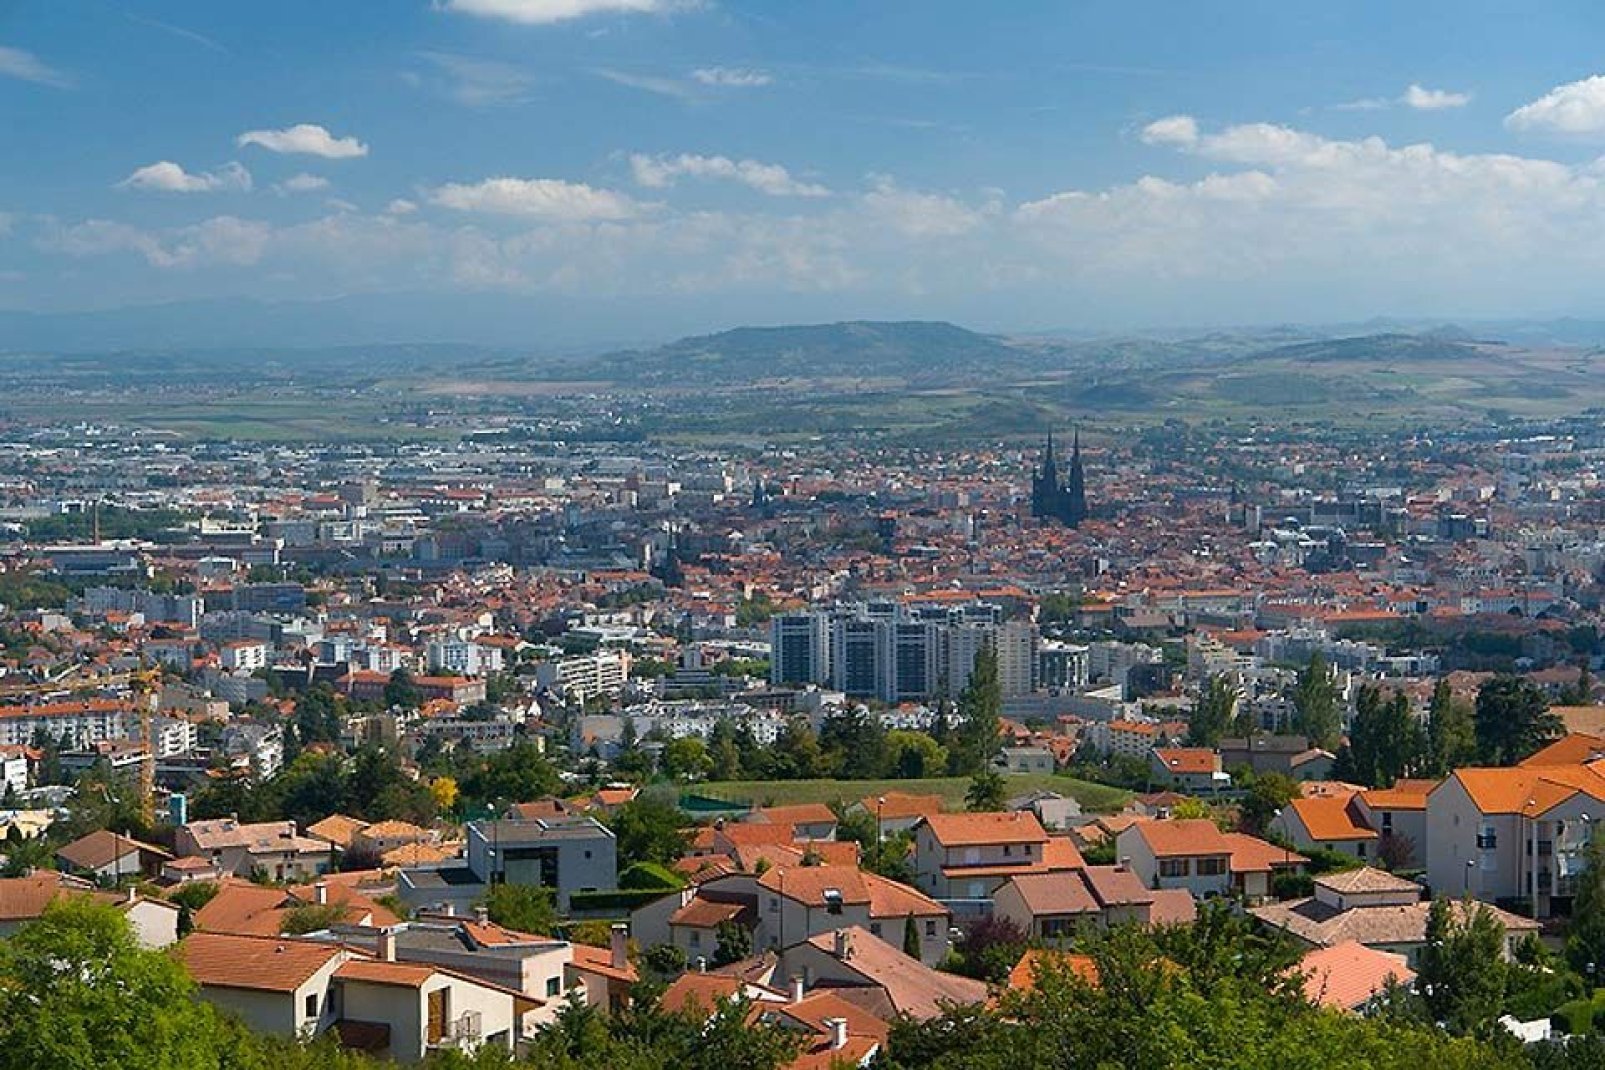 The capital of the Puy-de-Dôme department saw the birth of Blaise Pascal.